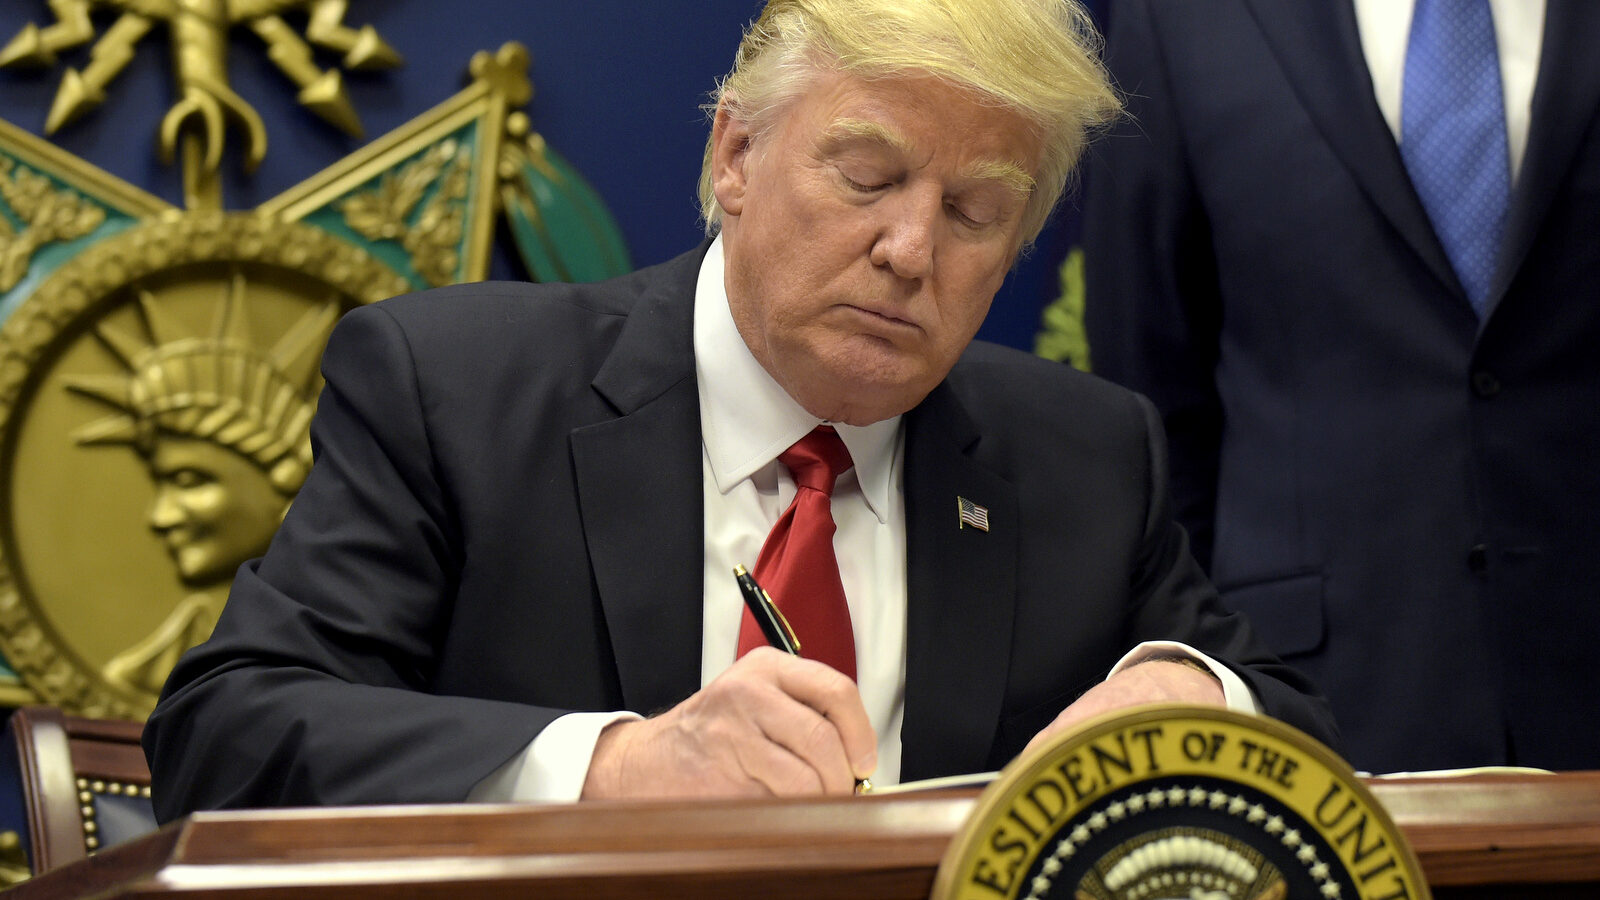 President Donald Trump signs an executive order on 'extreme vetting' during an event at the Pentagon in Washington, Friday, Jan. 27, 2017. (AP/Susan Walsh)